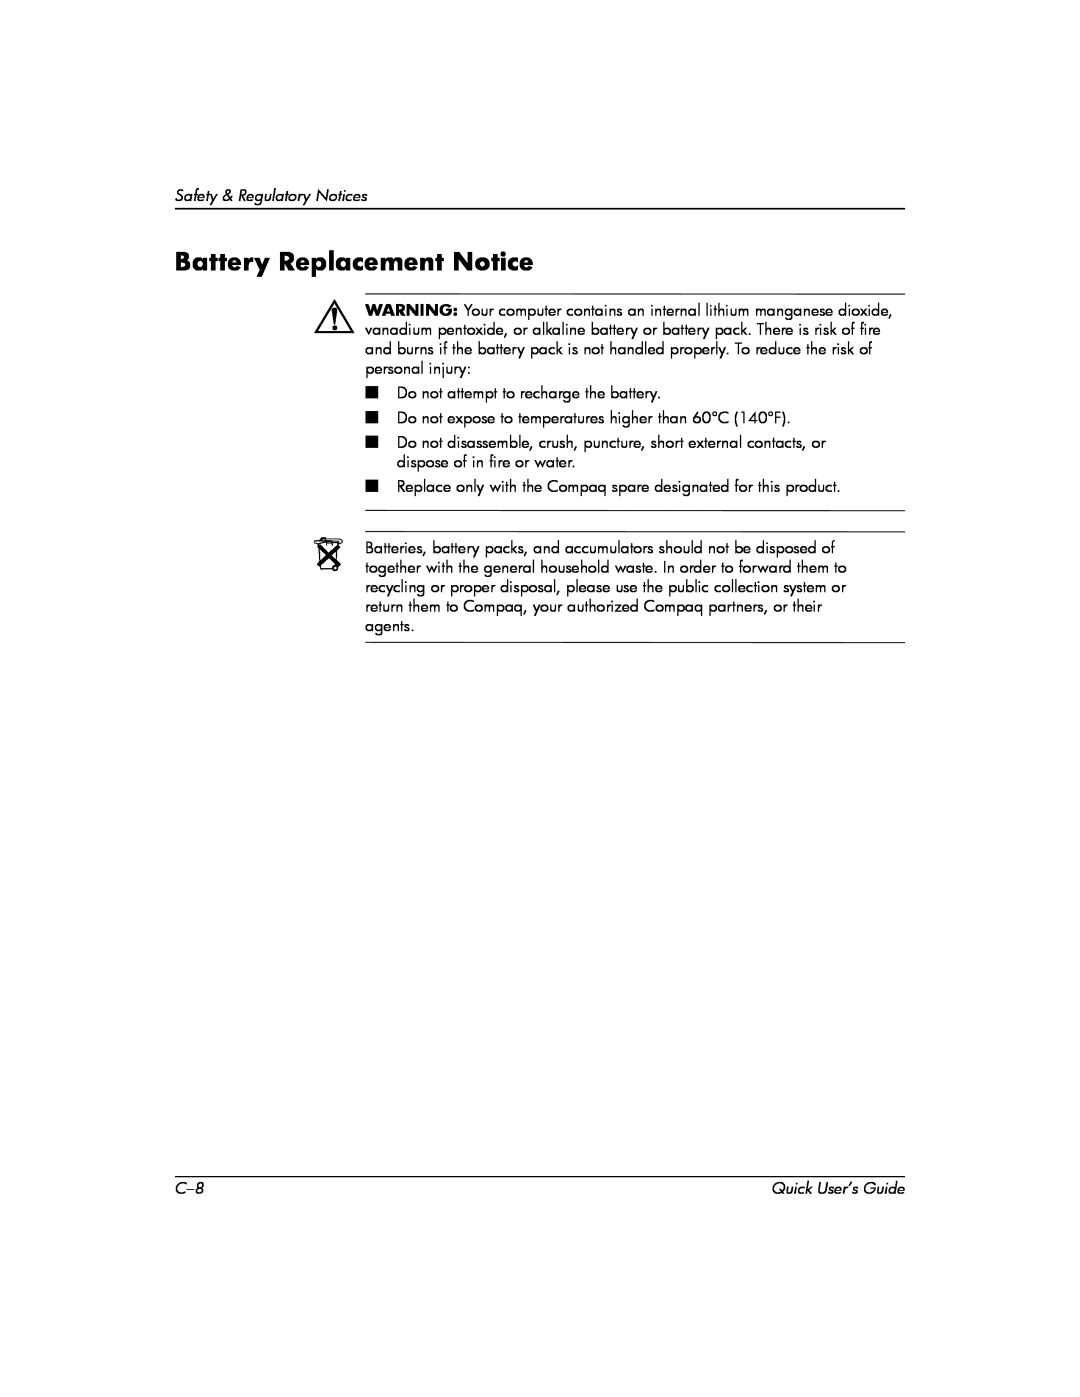 Compaq D510 e-pc manual Battery Replacement Notice, Safety & Regulatory Notices 